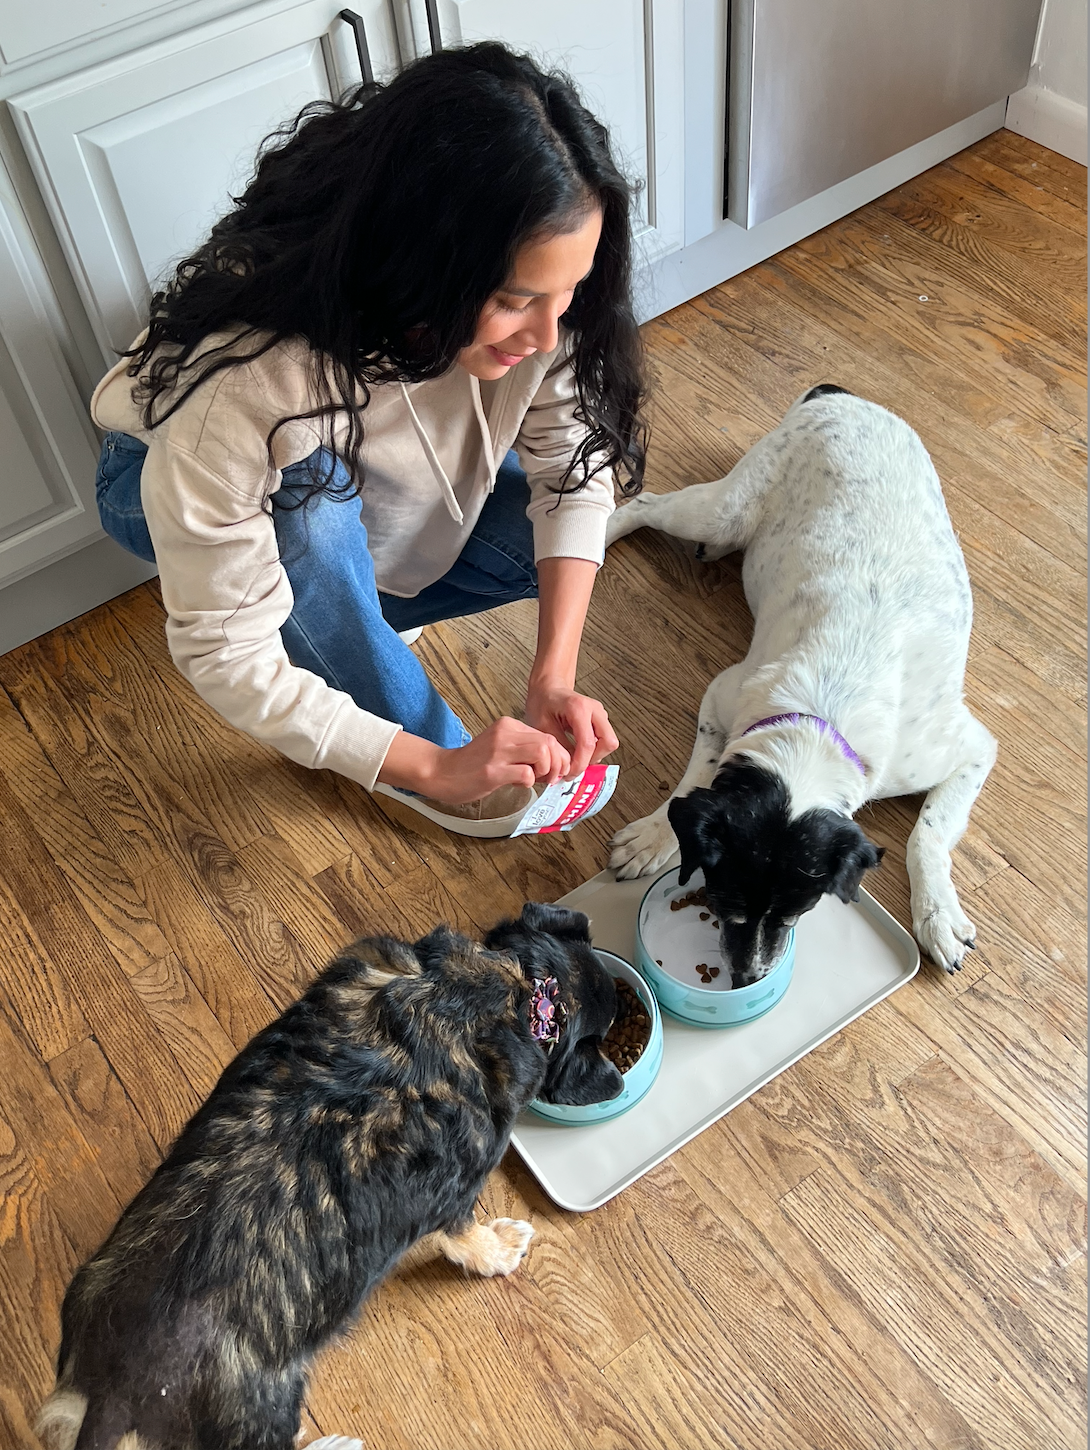 A woman feeding dogs from bowls, a dog lying down, and another dog eating from a bowl.